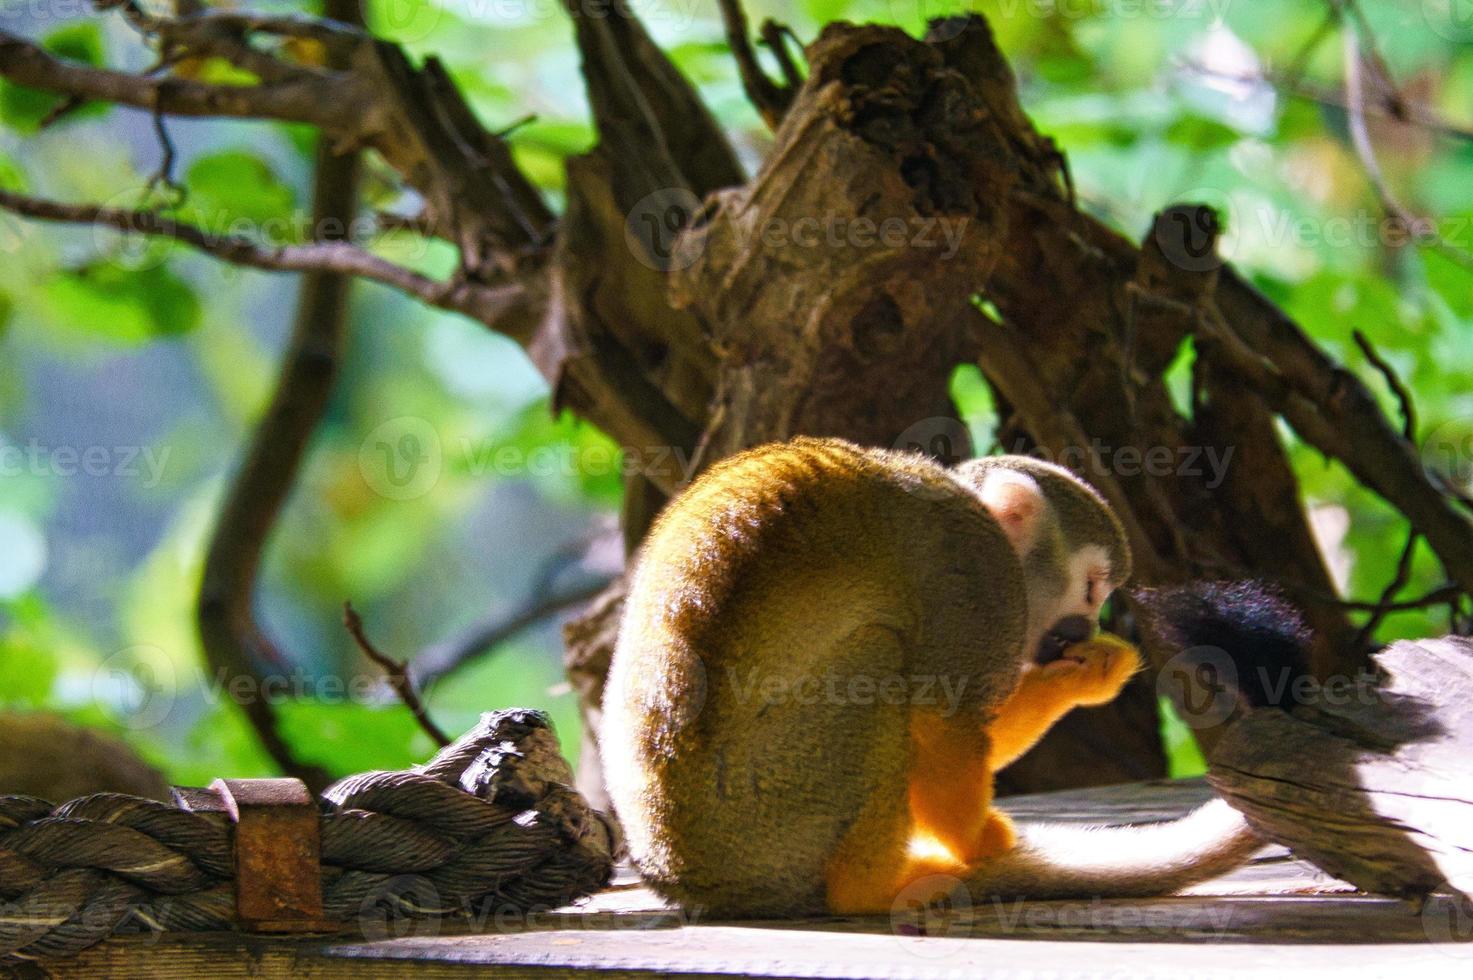 Squirrel monkey sitting on a platform and taking food. On a tree wrapped in leaves photo